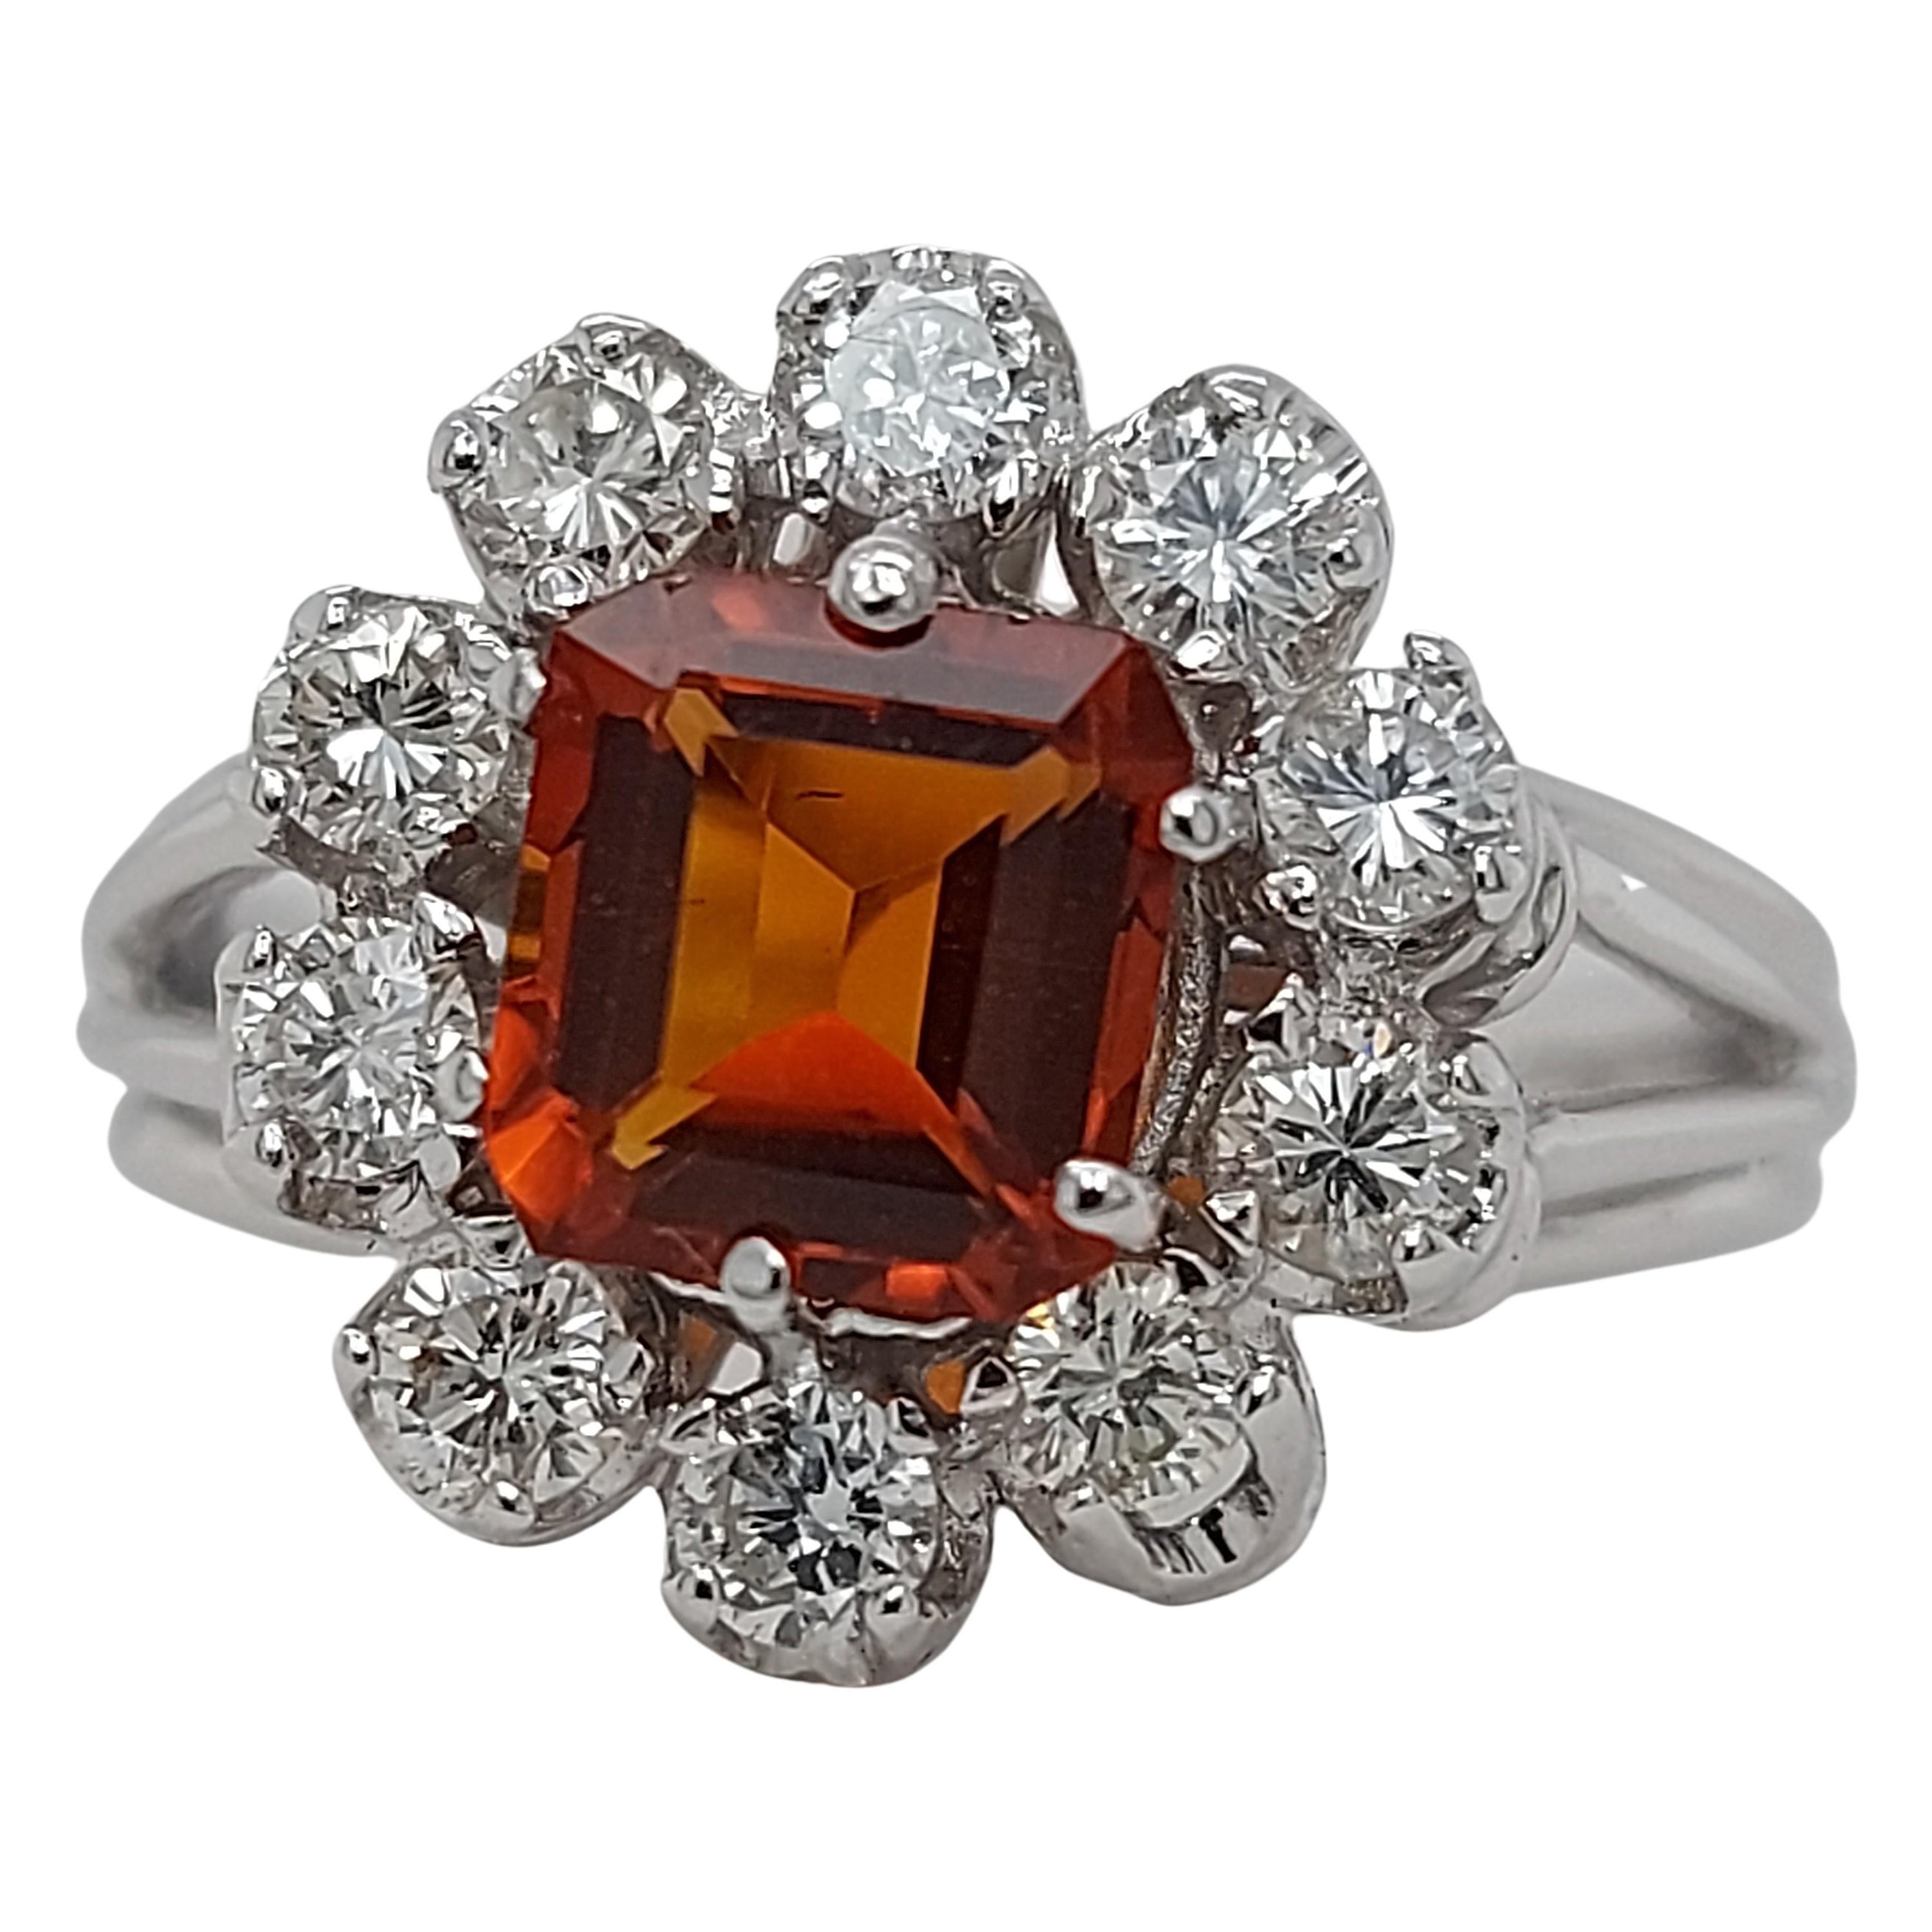 Stunning Ring with a Big Citrine Stone Surrounded by Diamonds